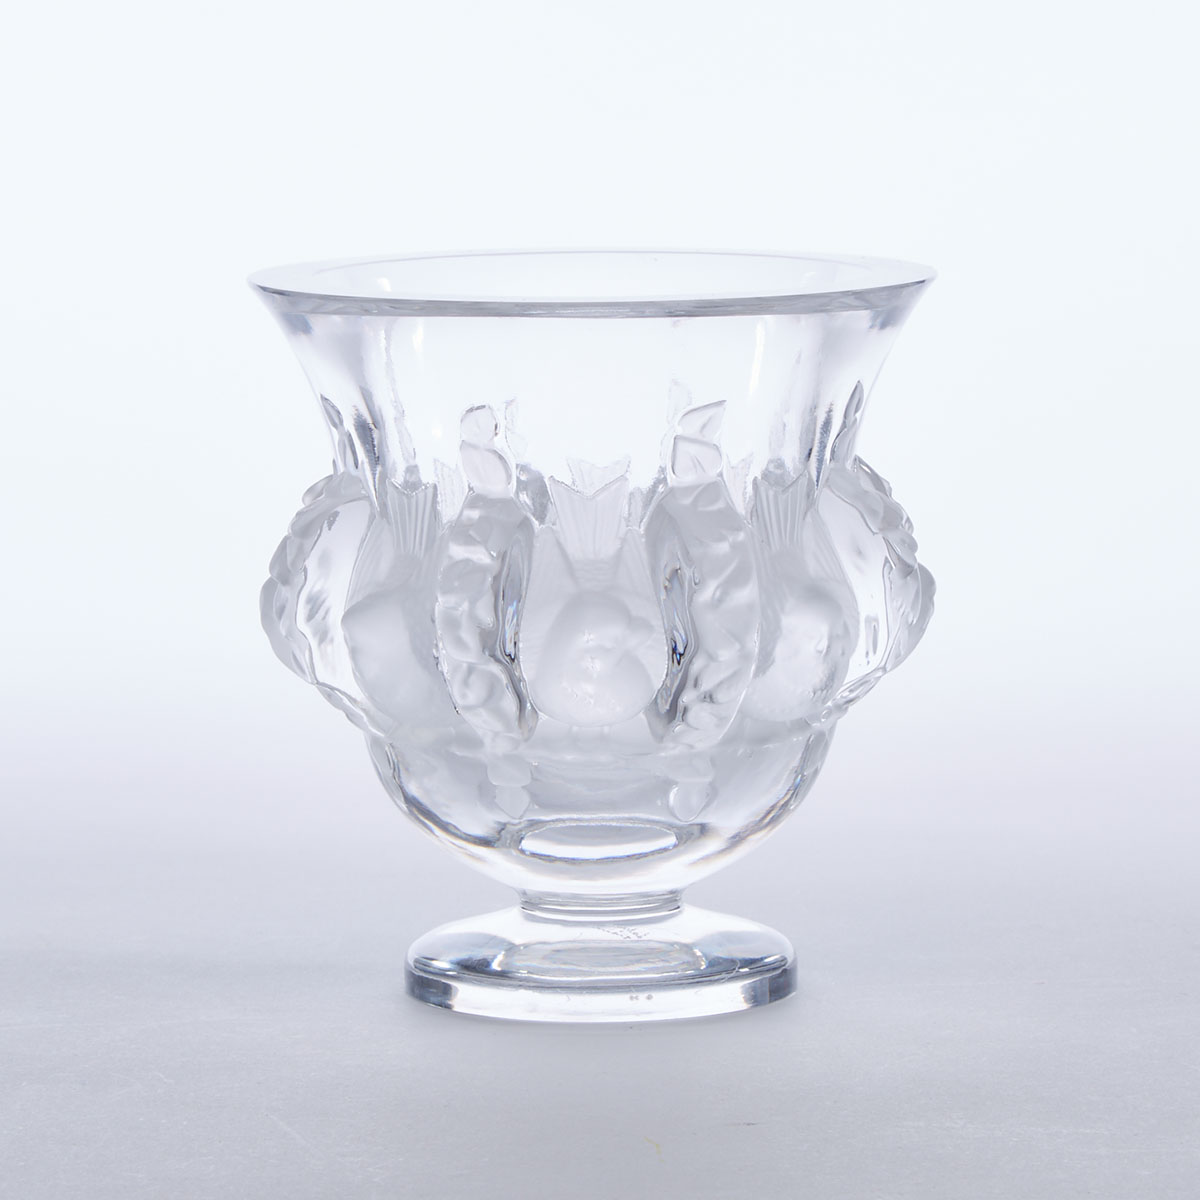 ‘Dampierre’, Lalique Moulded and Partly Frosted Glass Vase, post-1948